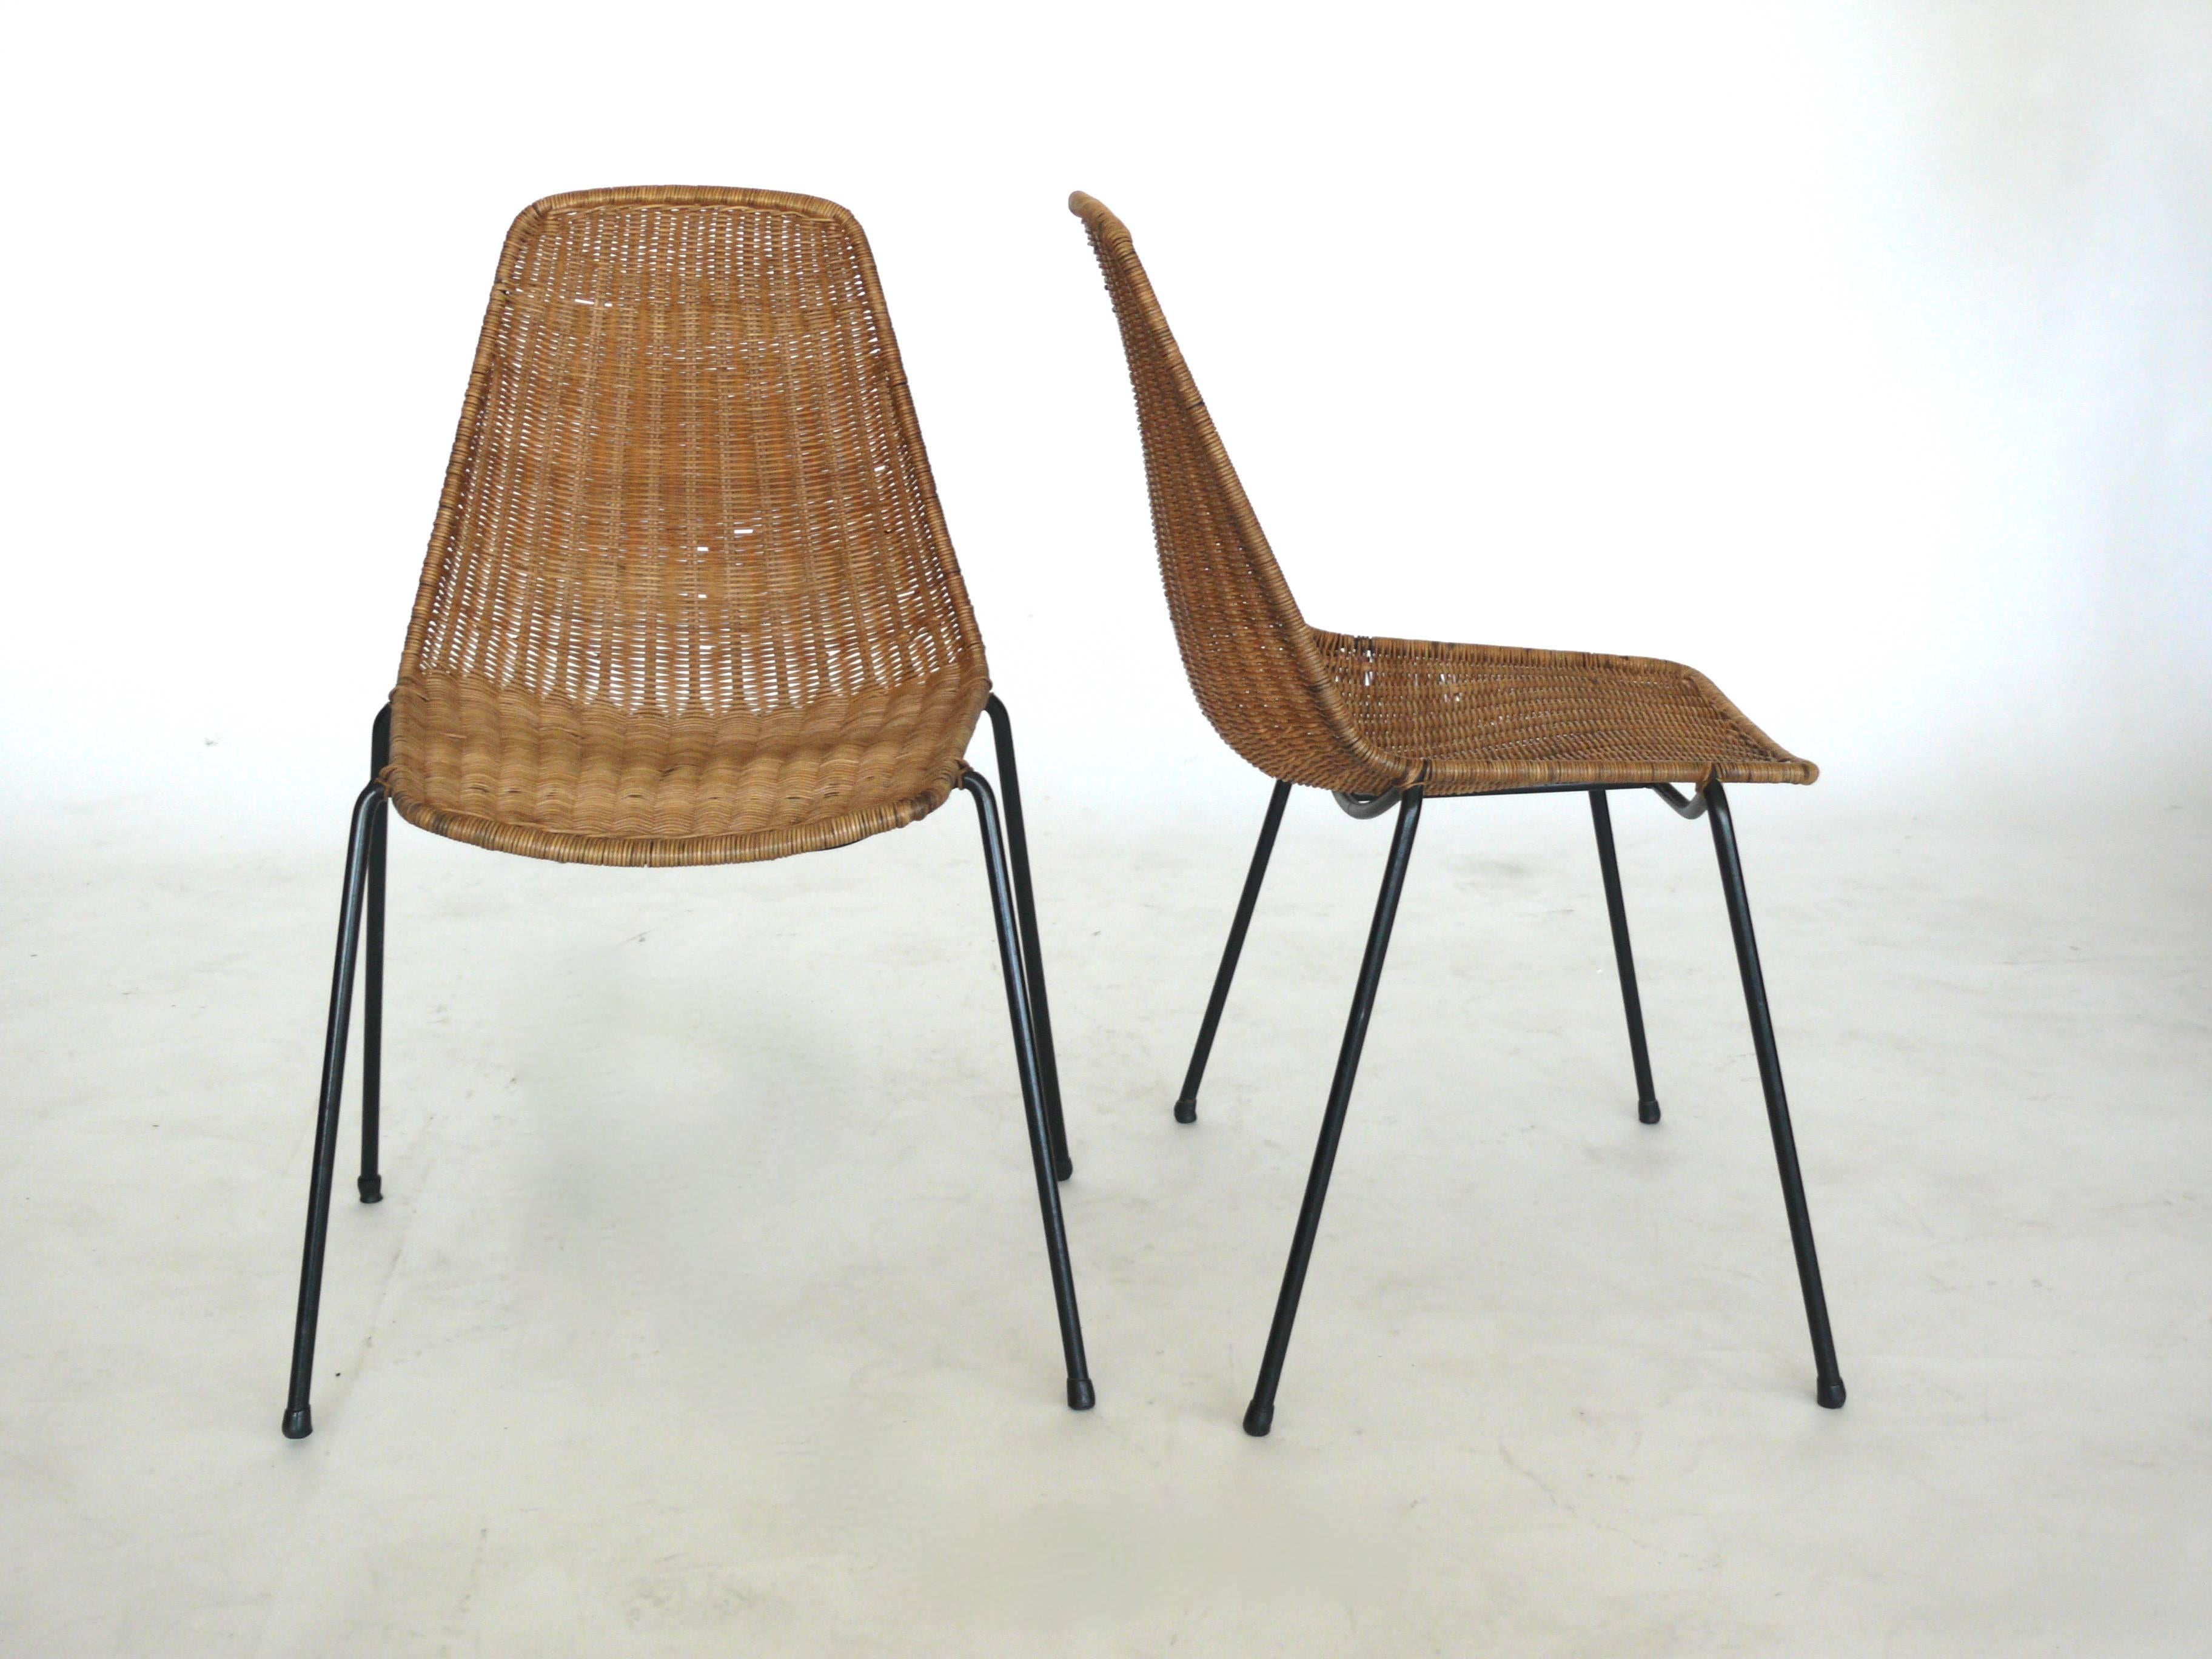 Handsome Italian wicker and iron chairs with simple bucket seat by Carlo graffi et Franco Campo.  An organic alternative to the Eames fiberglass chair!